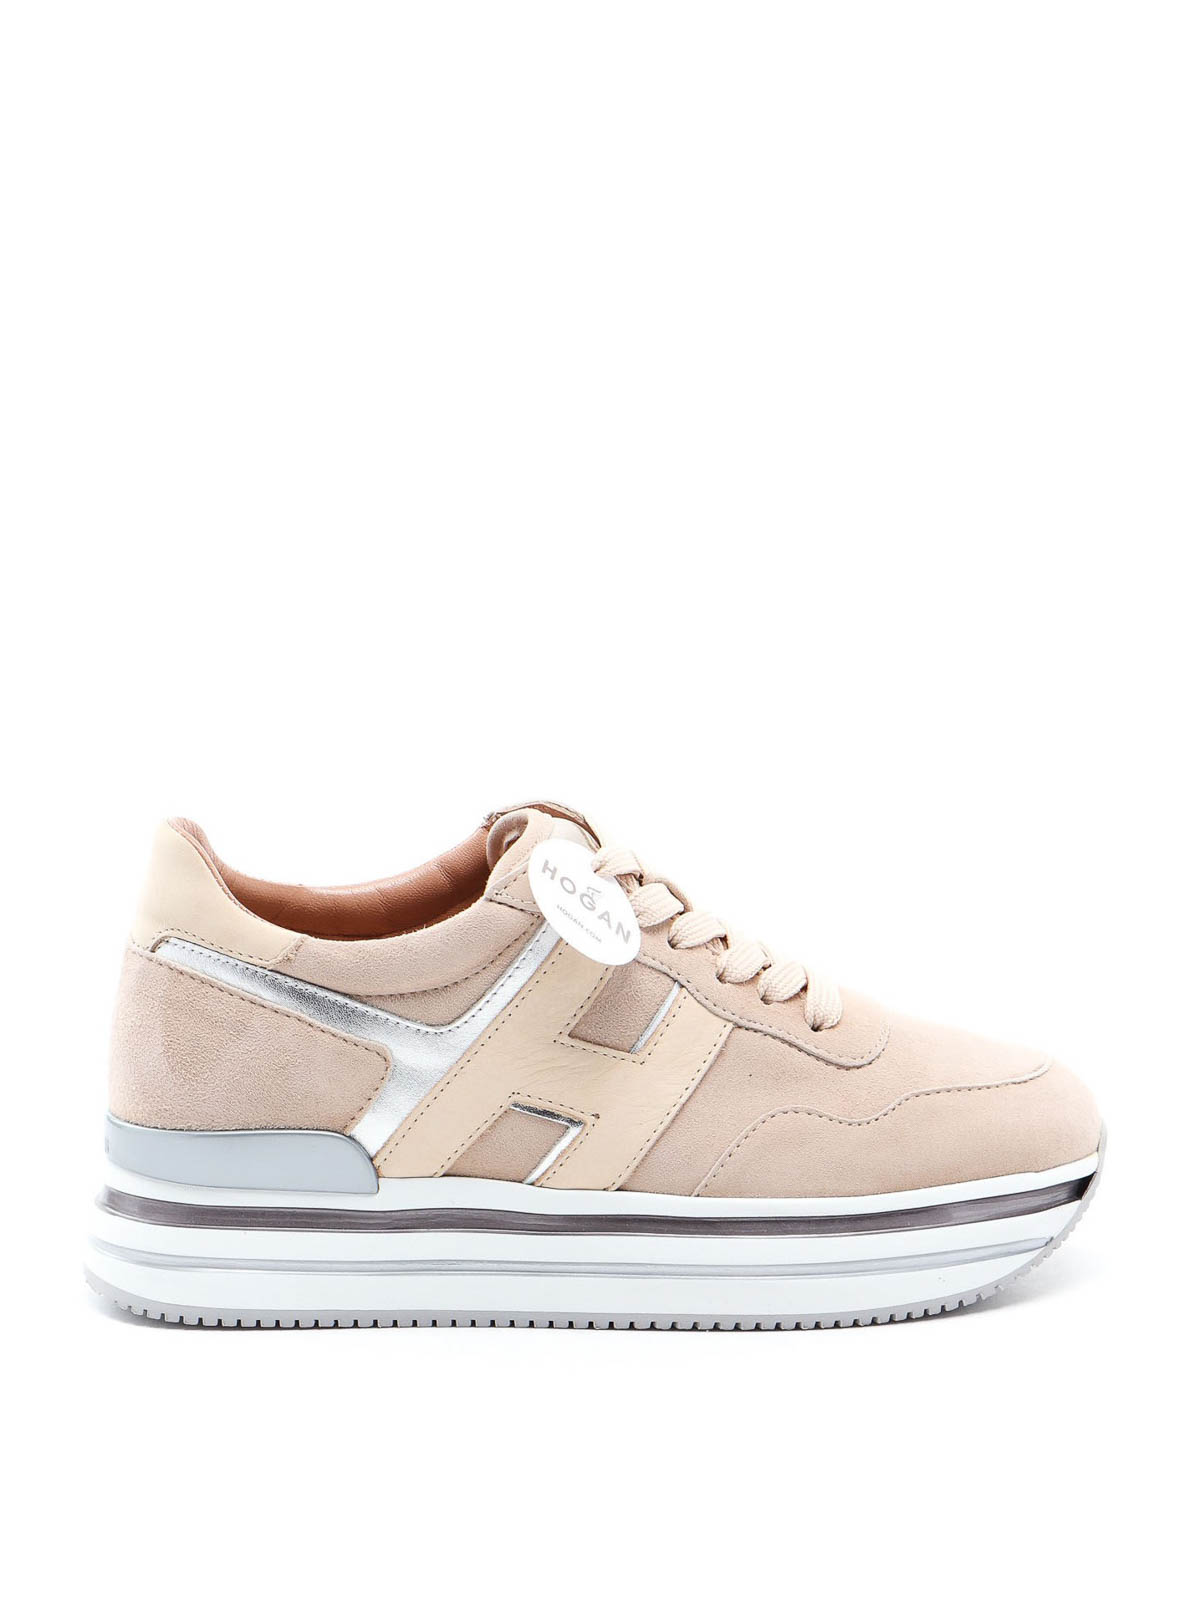 HOGAN H483 NUBUCK AND LEATHER trainers